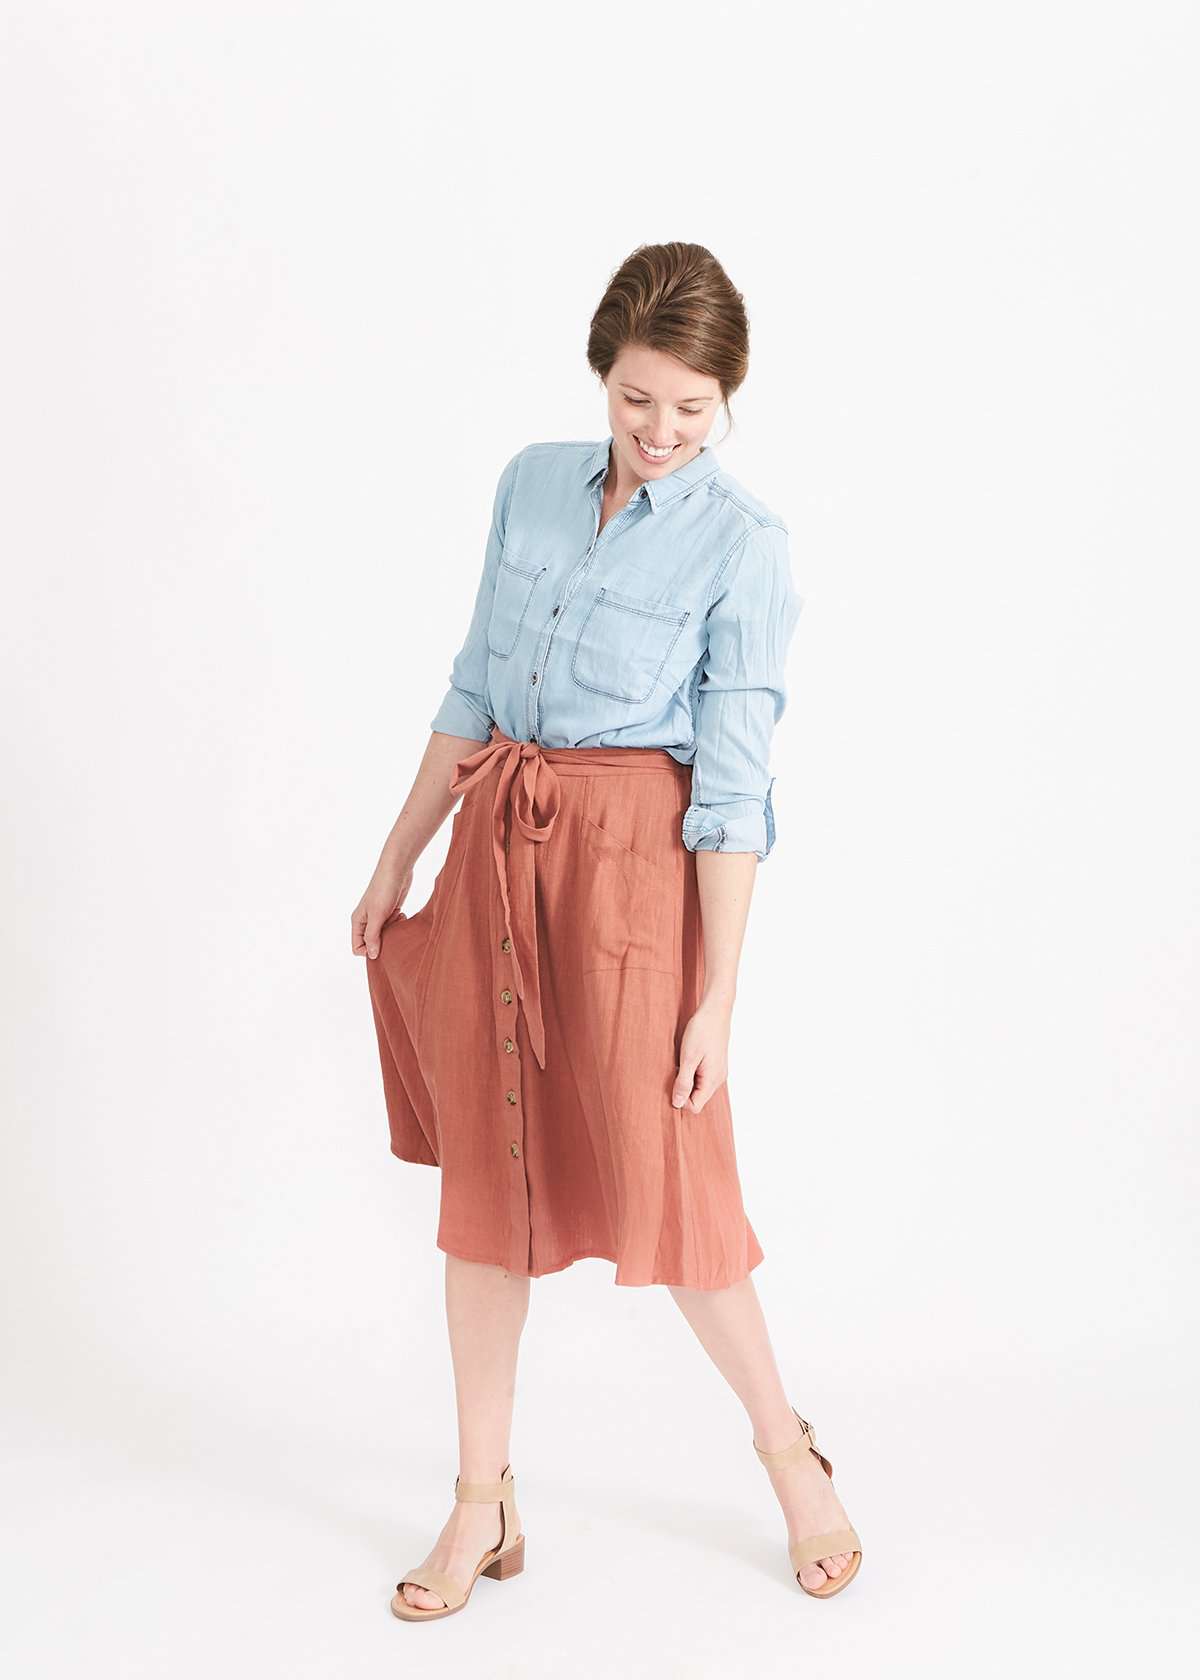 Woman wearing a button front self tie pink midi skirt with big pockets and paired with dress heels and chambray top